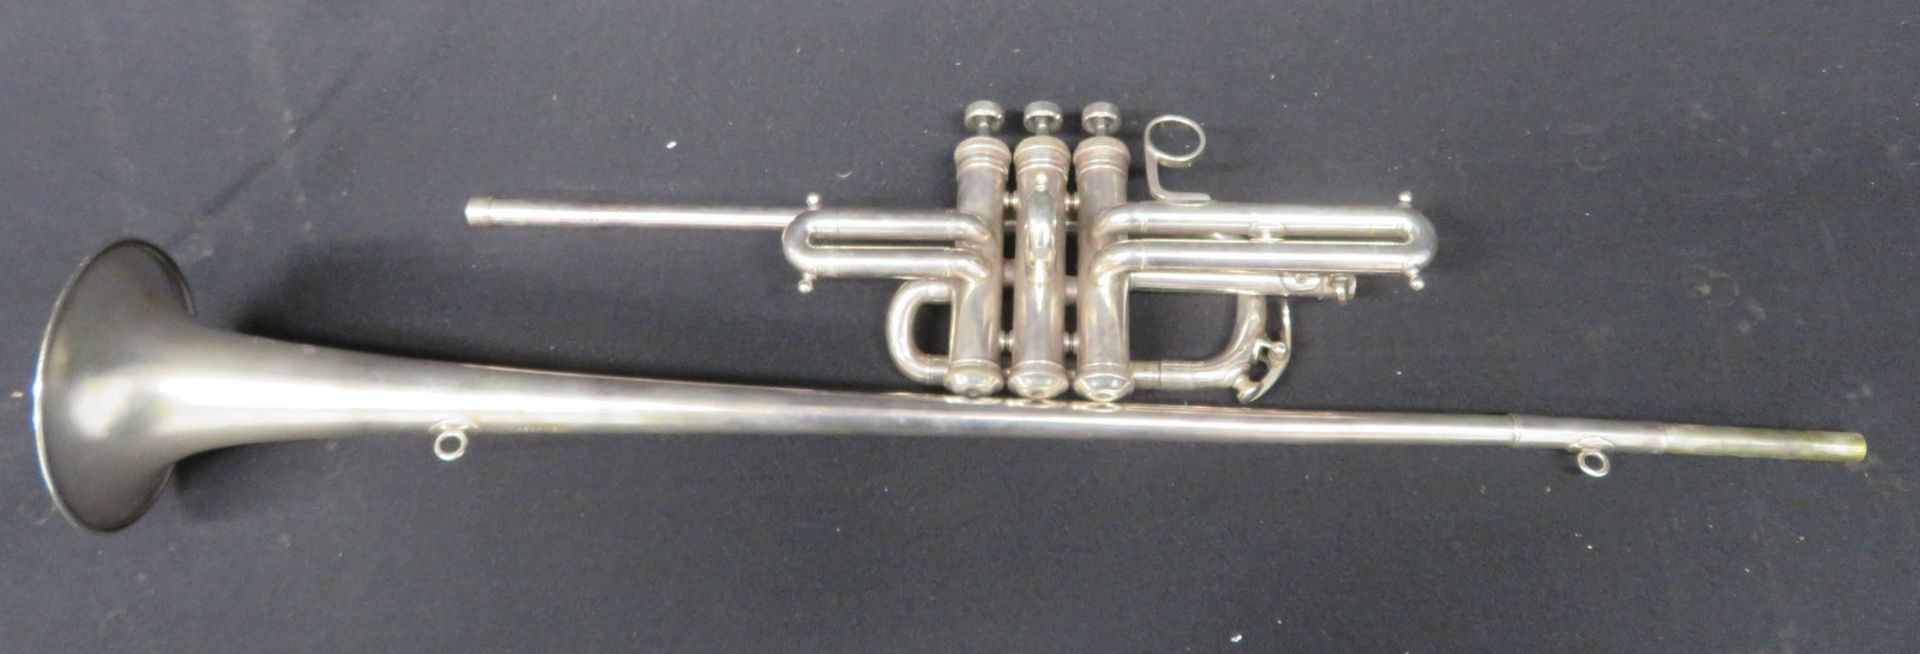 Boosey & Hawkes Imperial fanfare trumpet with case. Serial number: 514759. - Bild 16 aus 18